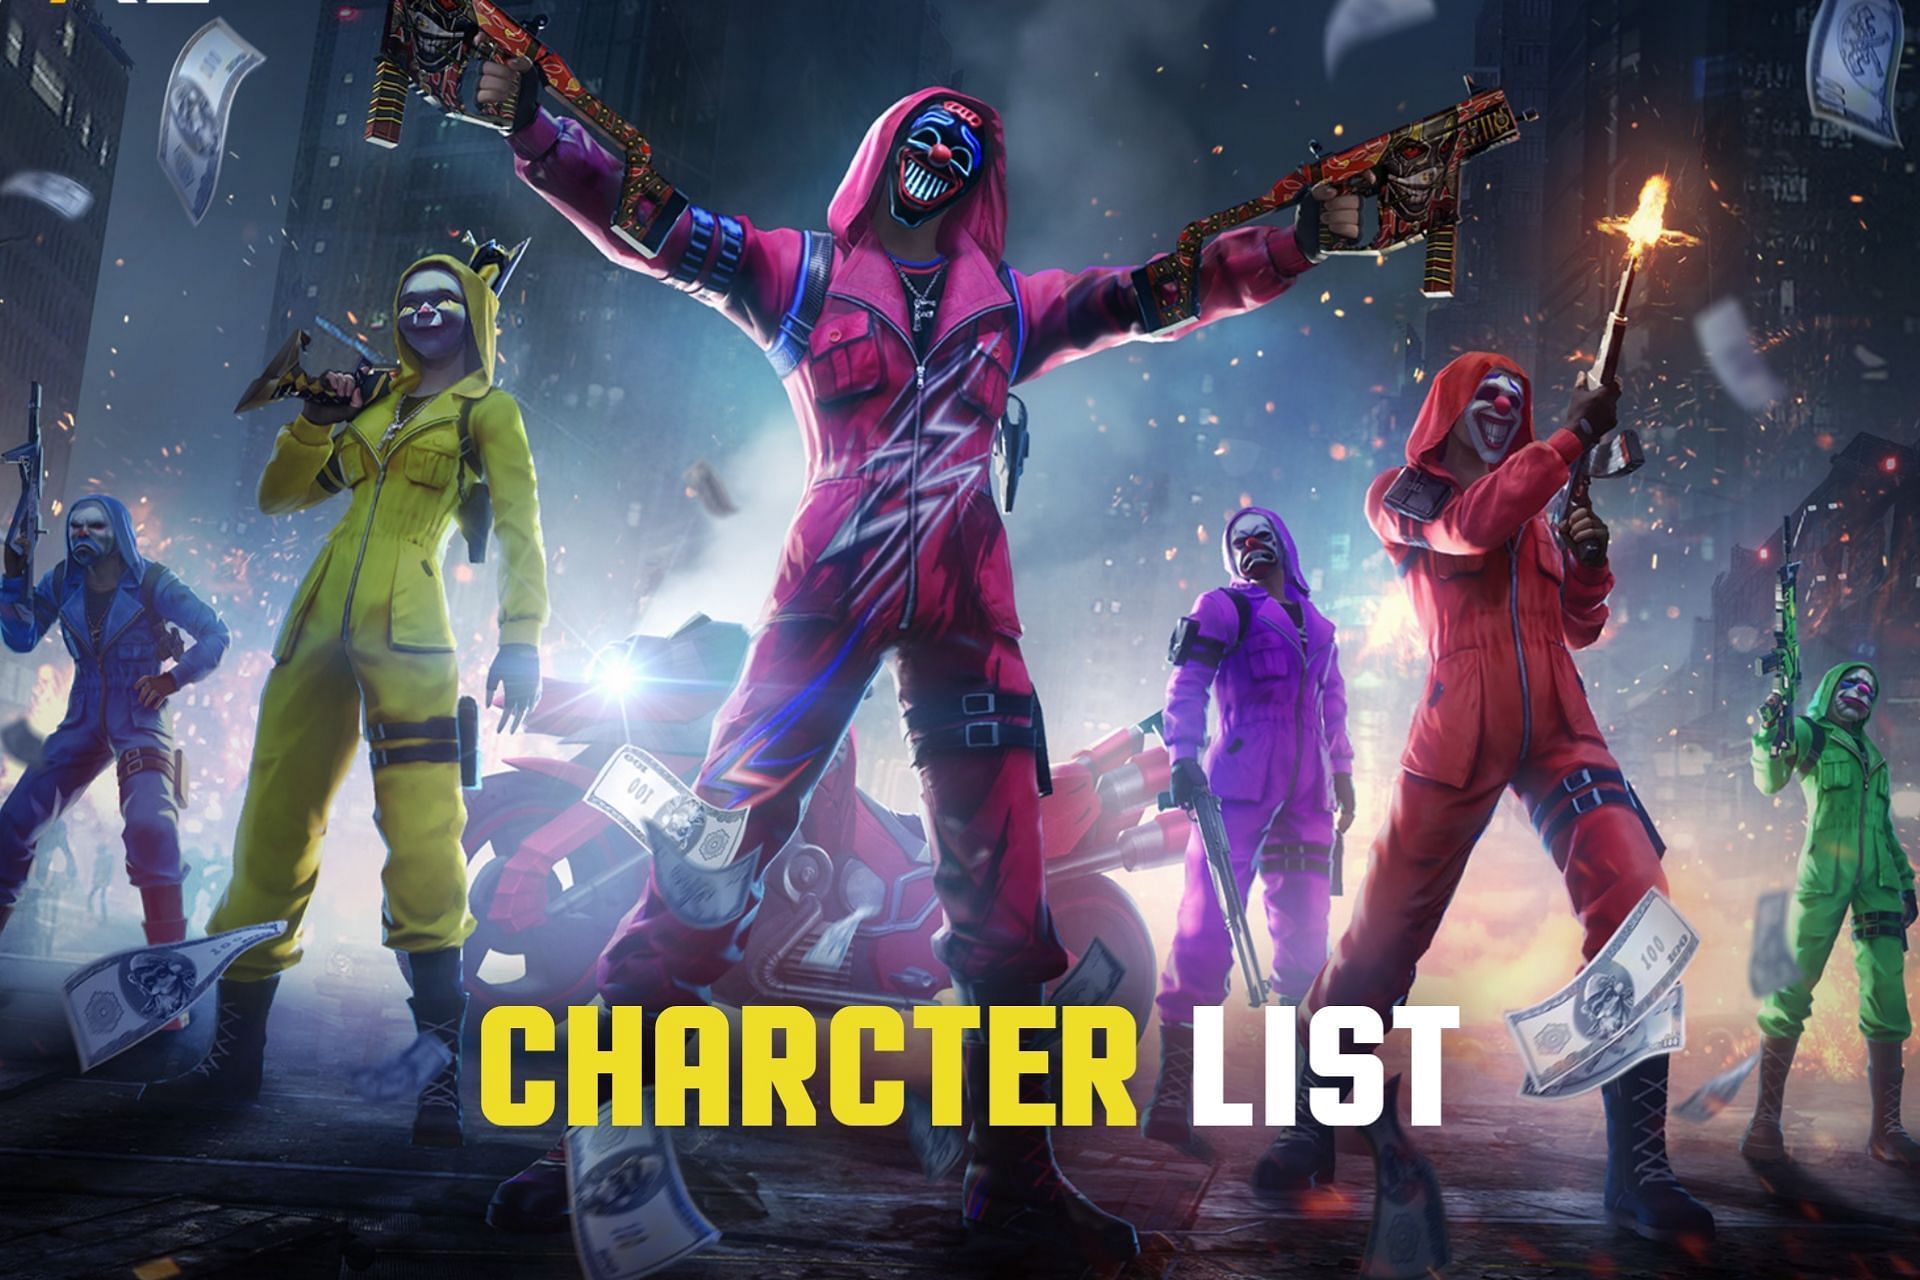 List of Free Fire characters released in 2022